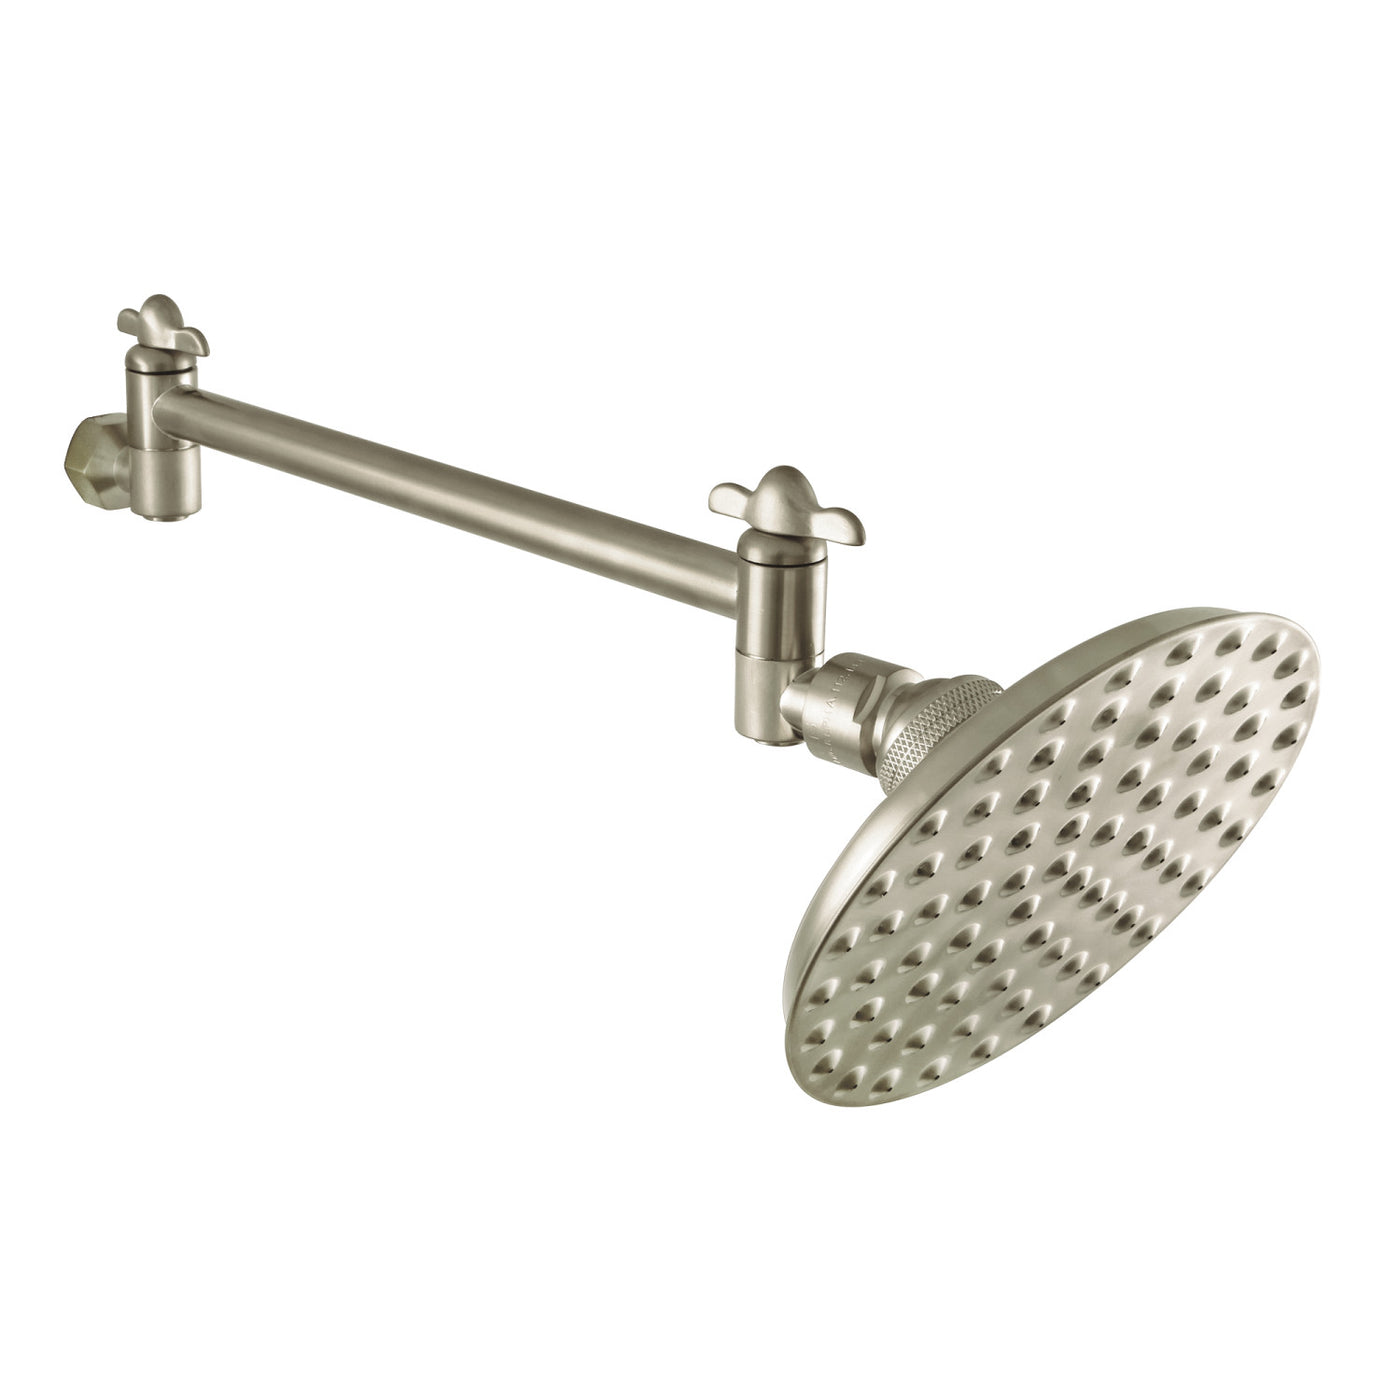 Elements of Design DK13528 5-1/4 Inch OD Showerhead with 10-Inch Shower Arm, Brushed Nickel